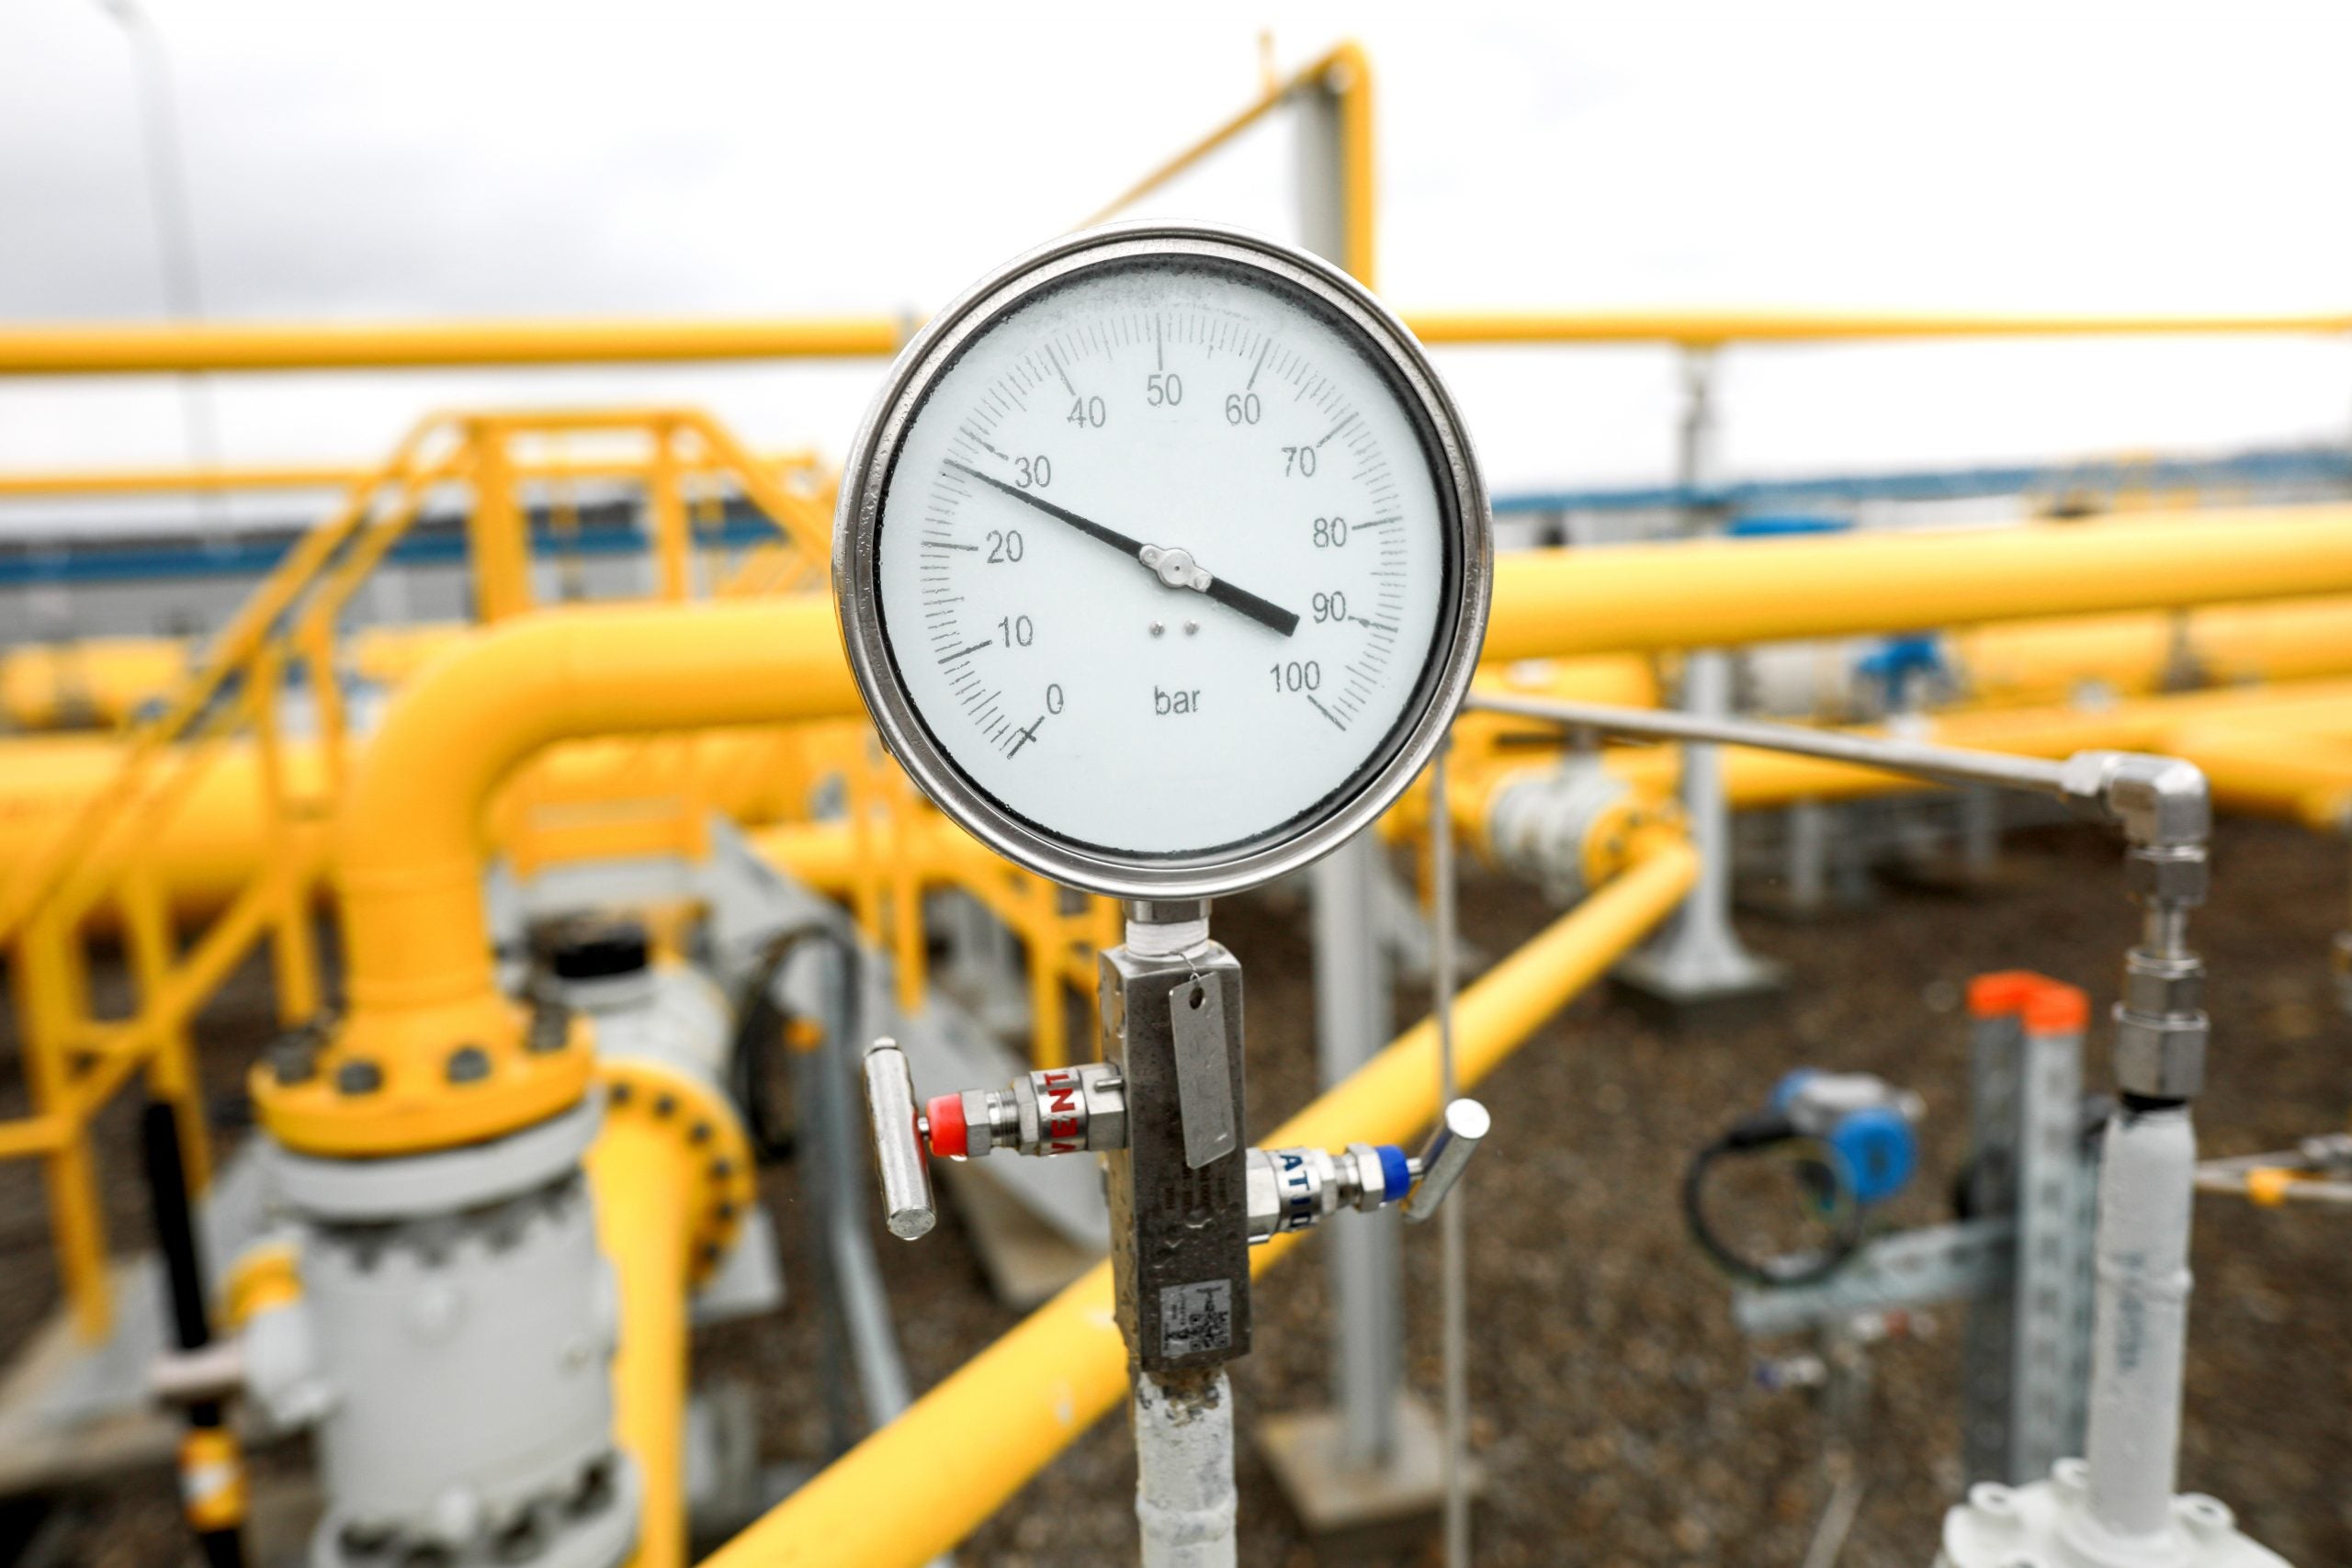 Industrial equipment (pipes, manometer/pressure gauge, levers, faucets, indicators) in a natural gas compressor station.